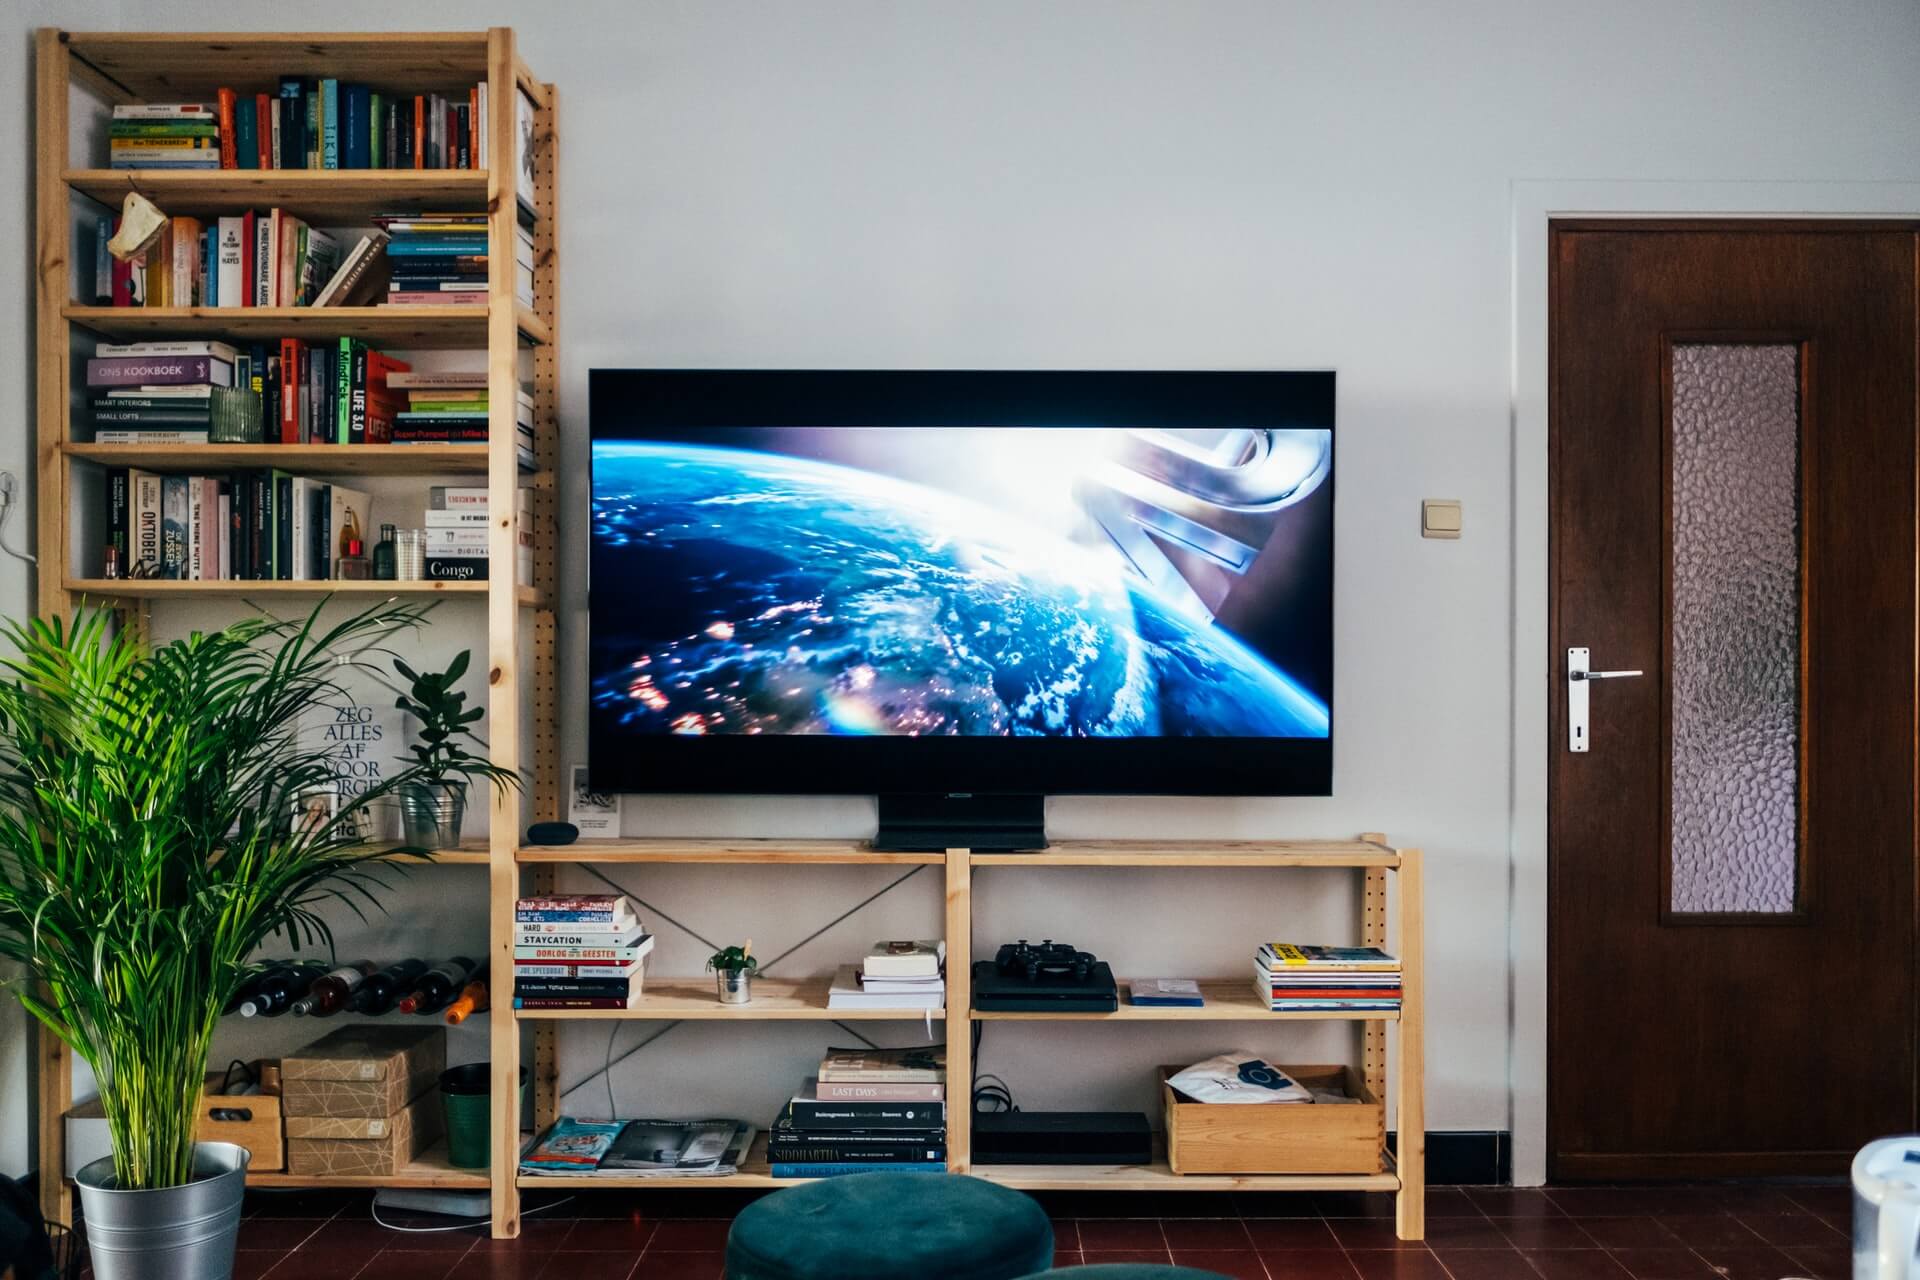  Features Of Smart Tv And How Does It Work